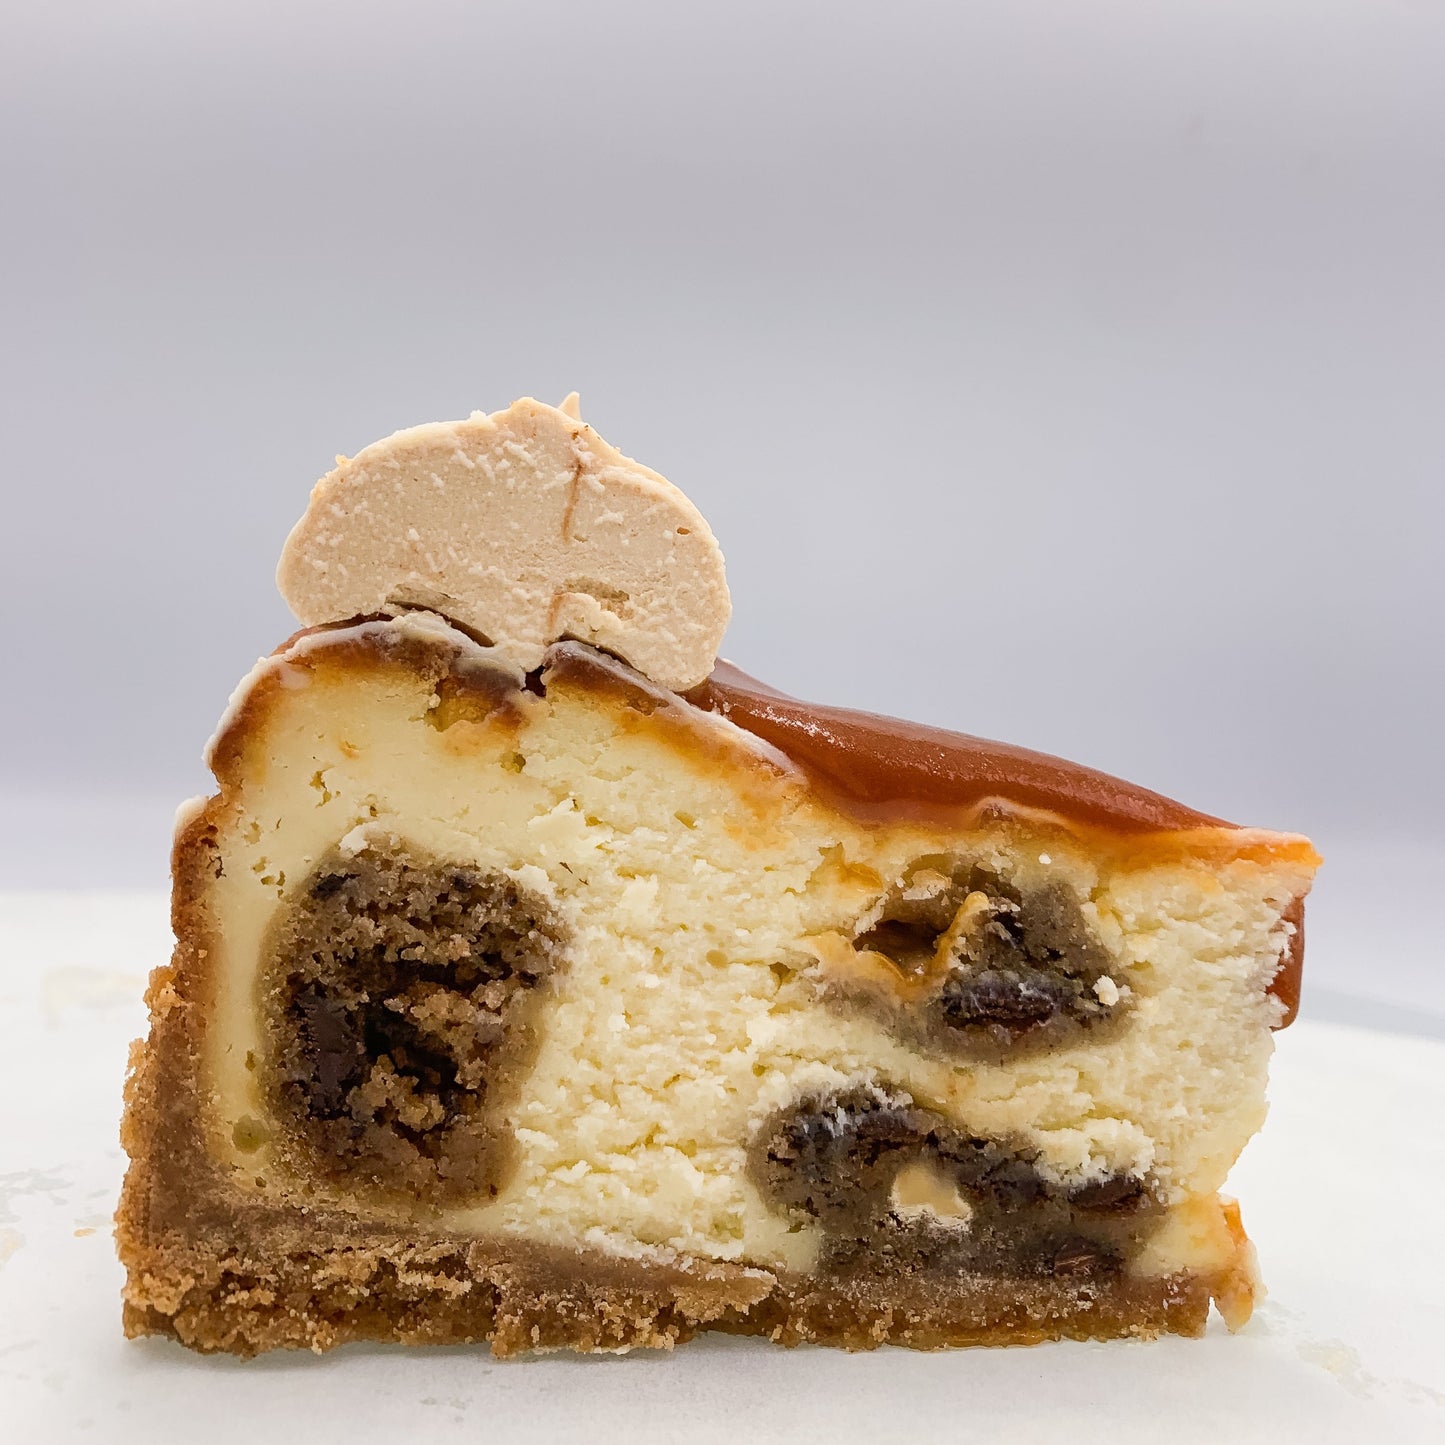 The Cookie Dough Cheesecake